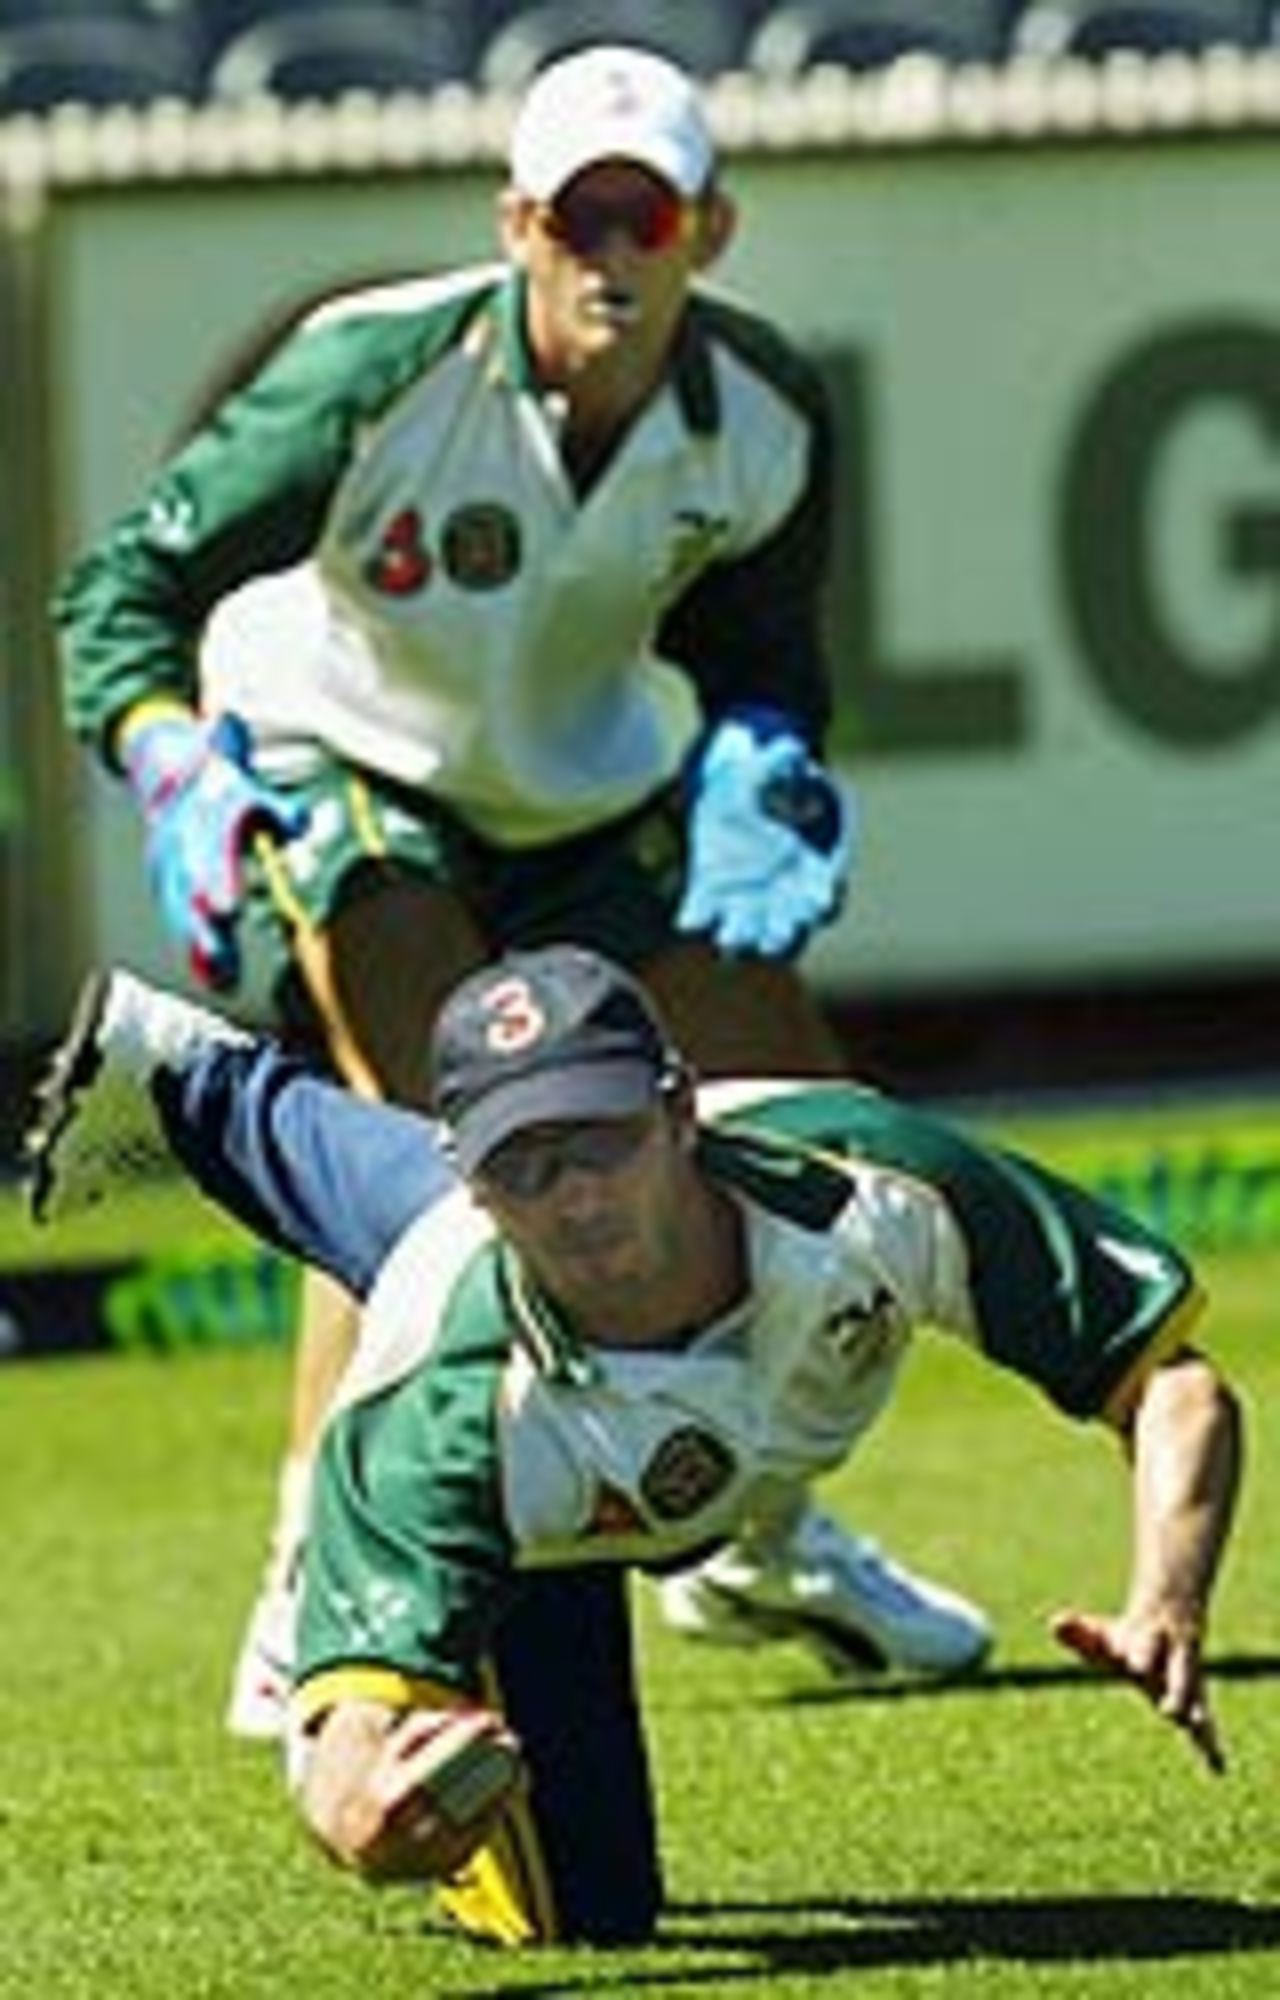 Damien Martyn dives during fielding practice as Adam Gilchrist looks on, Melbourne, December 24, 2003